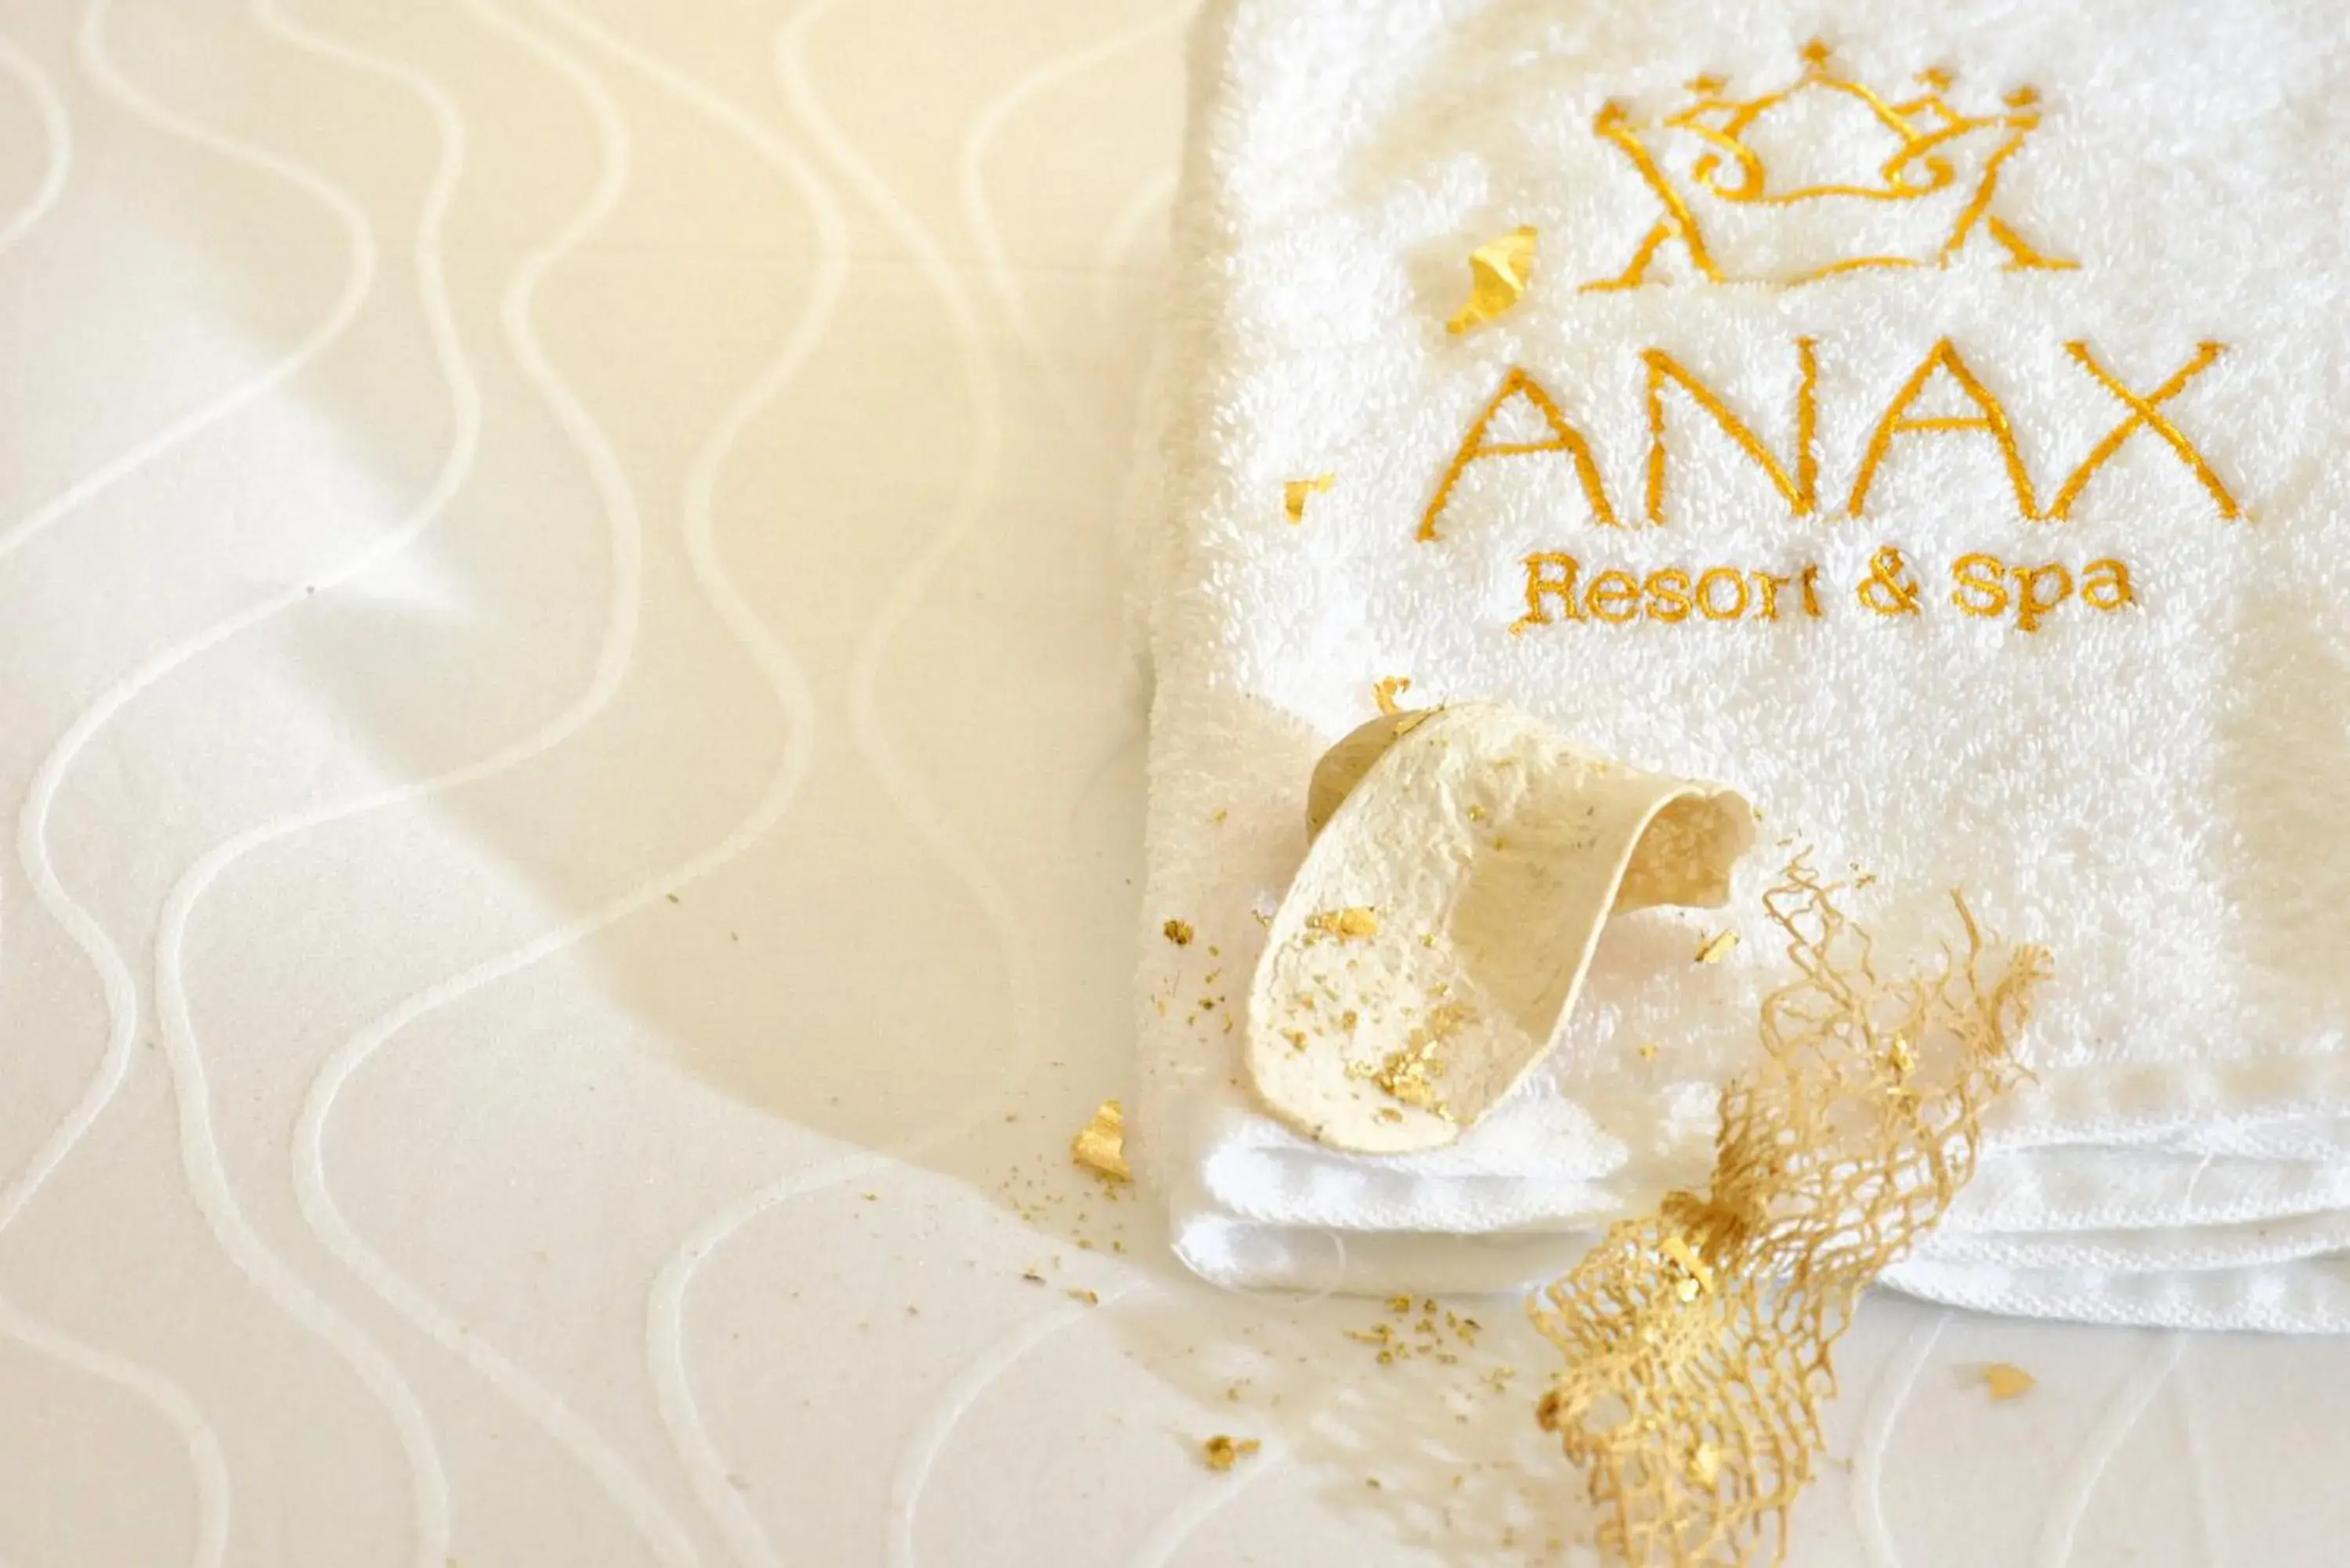 Logo/Certificate/Sign in Anax Resort and Spa